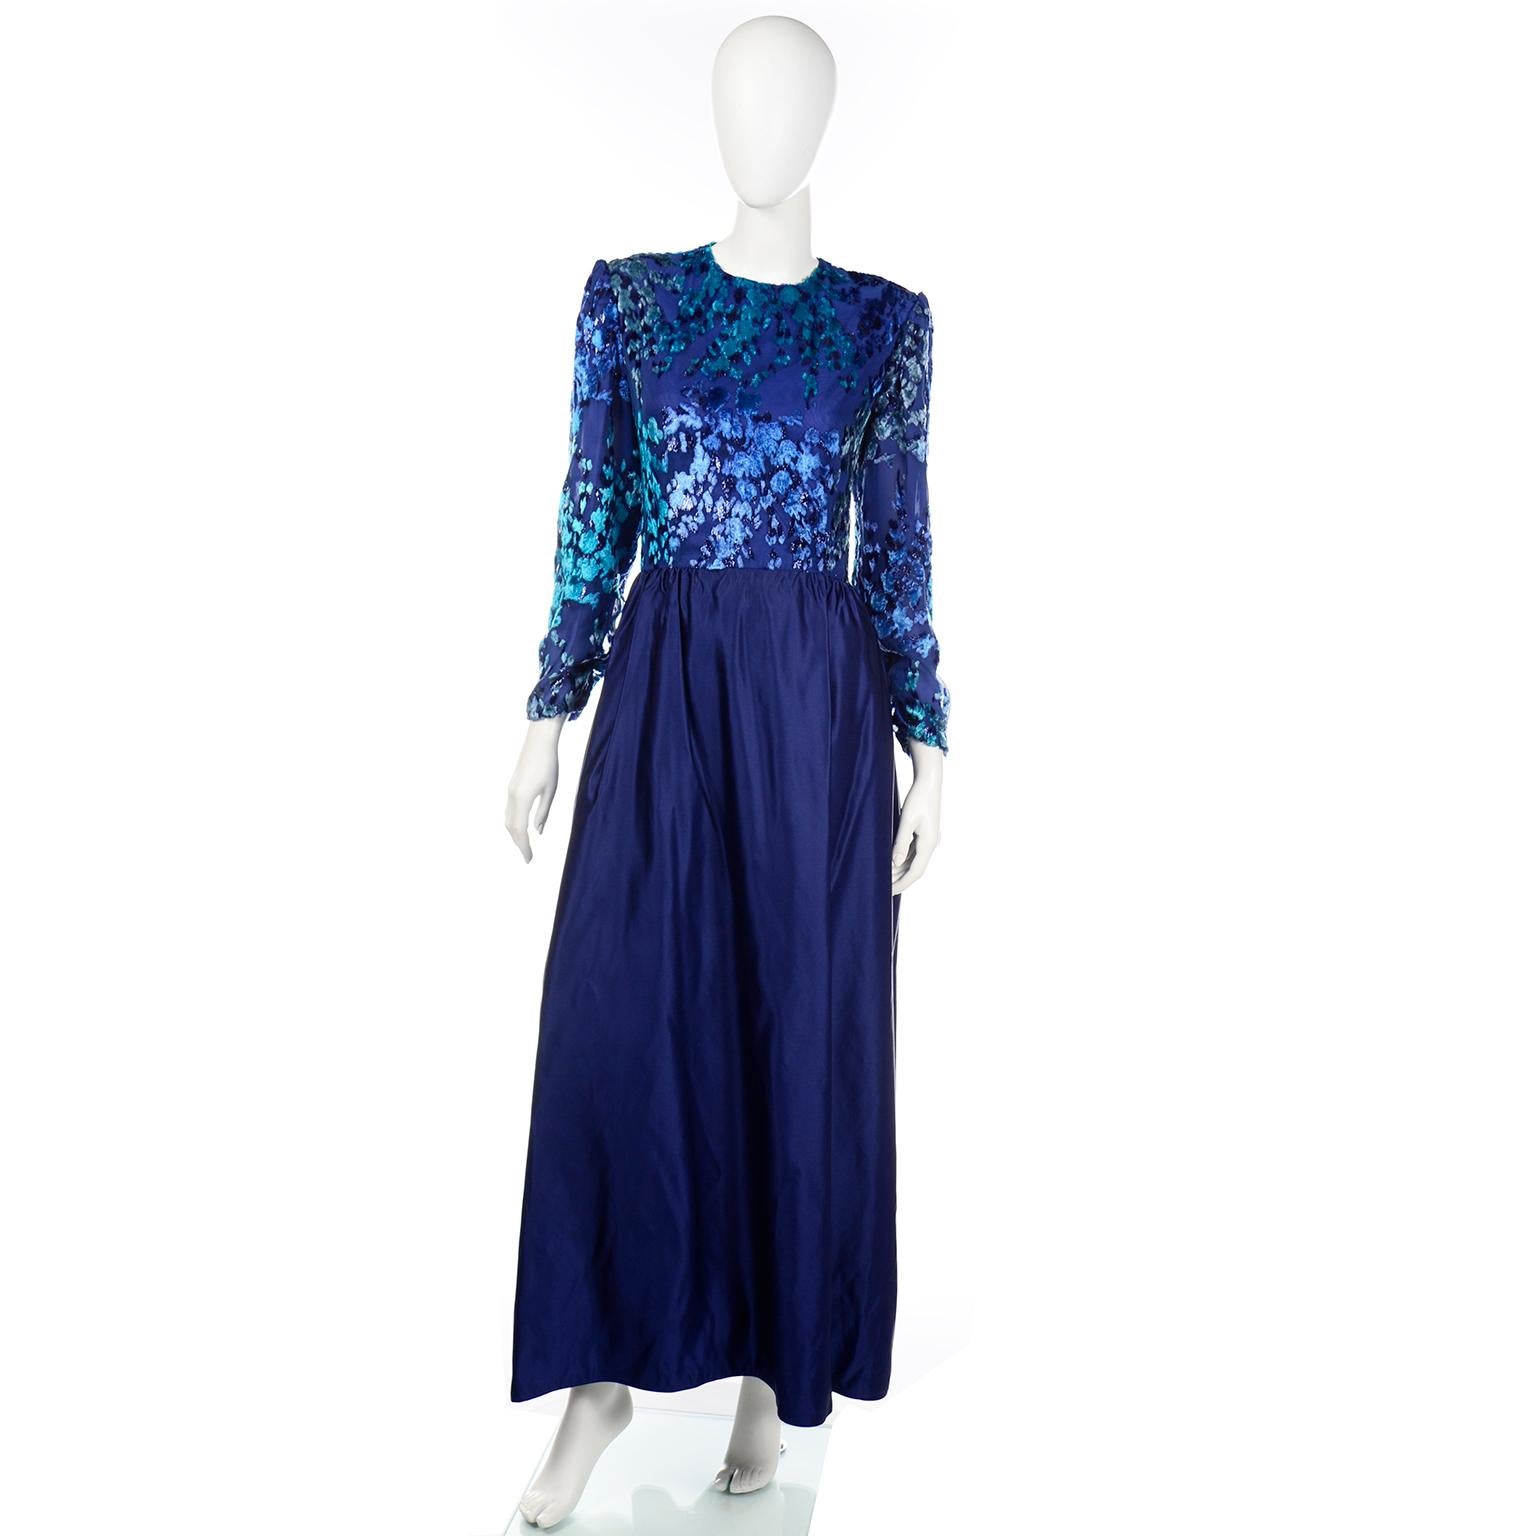 This is a really elegant vintage Richilene evening gown with a blue taffeta skirt and a gorgeous burnout velvet bodice in pretty shades of blue. We love the ever so slight metallic threads that give the bodice a just the right amount of glistening 